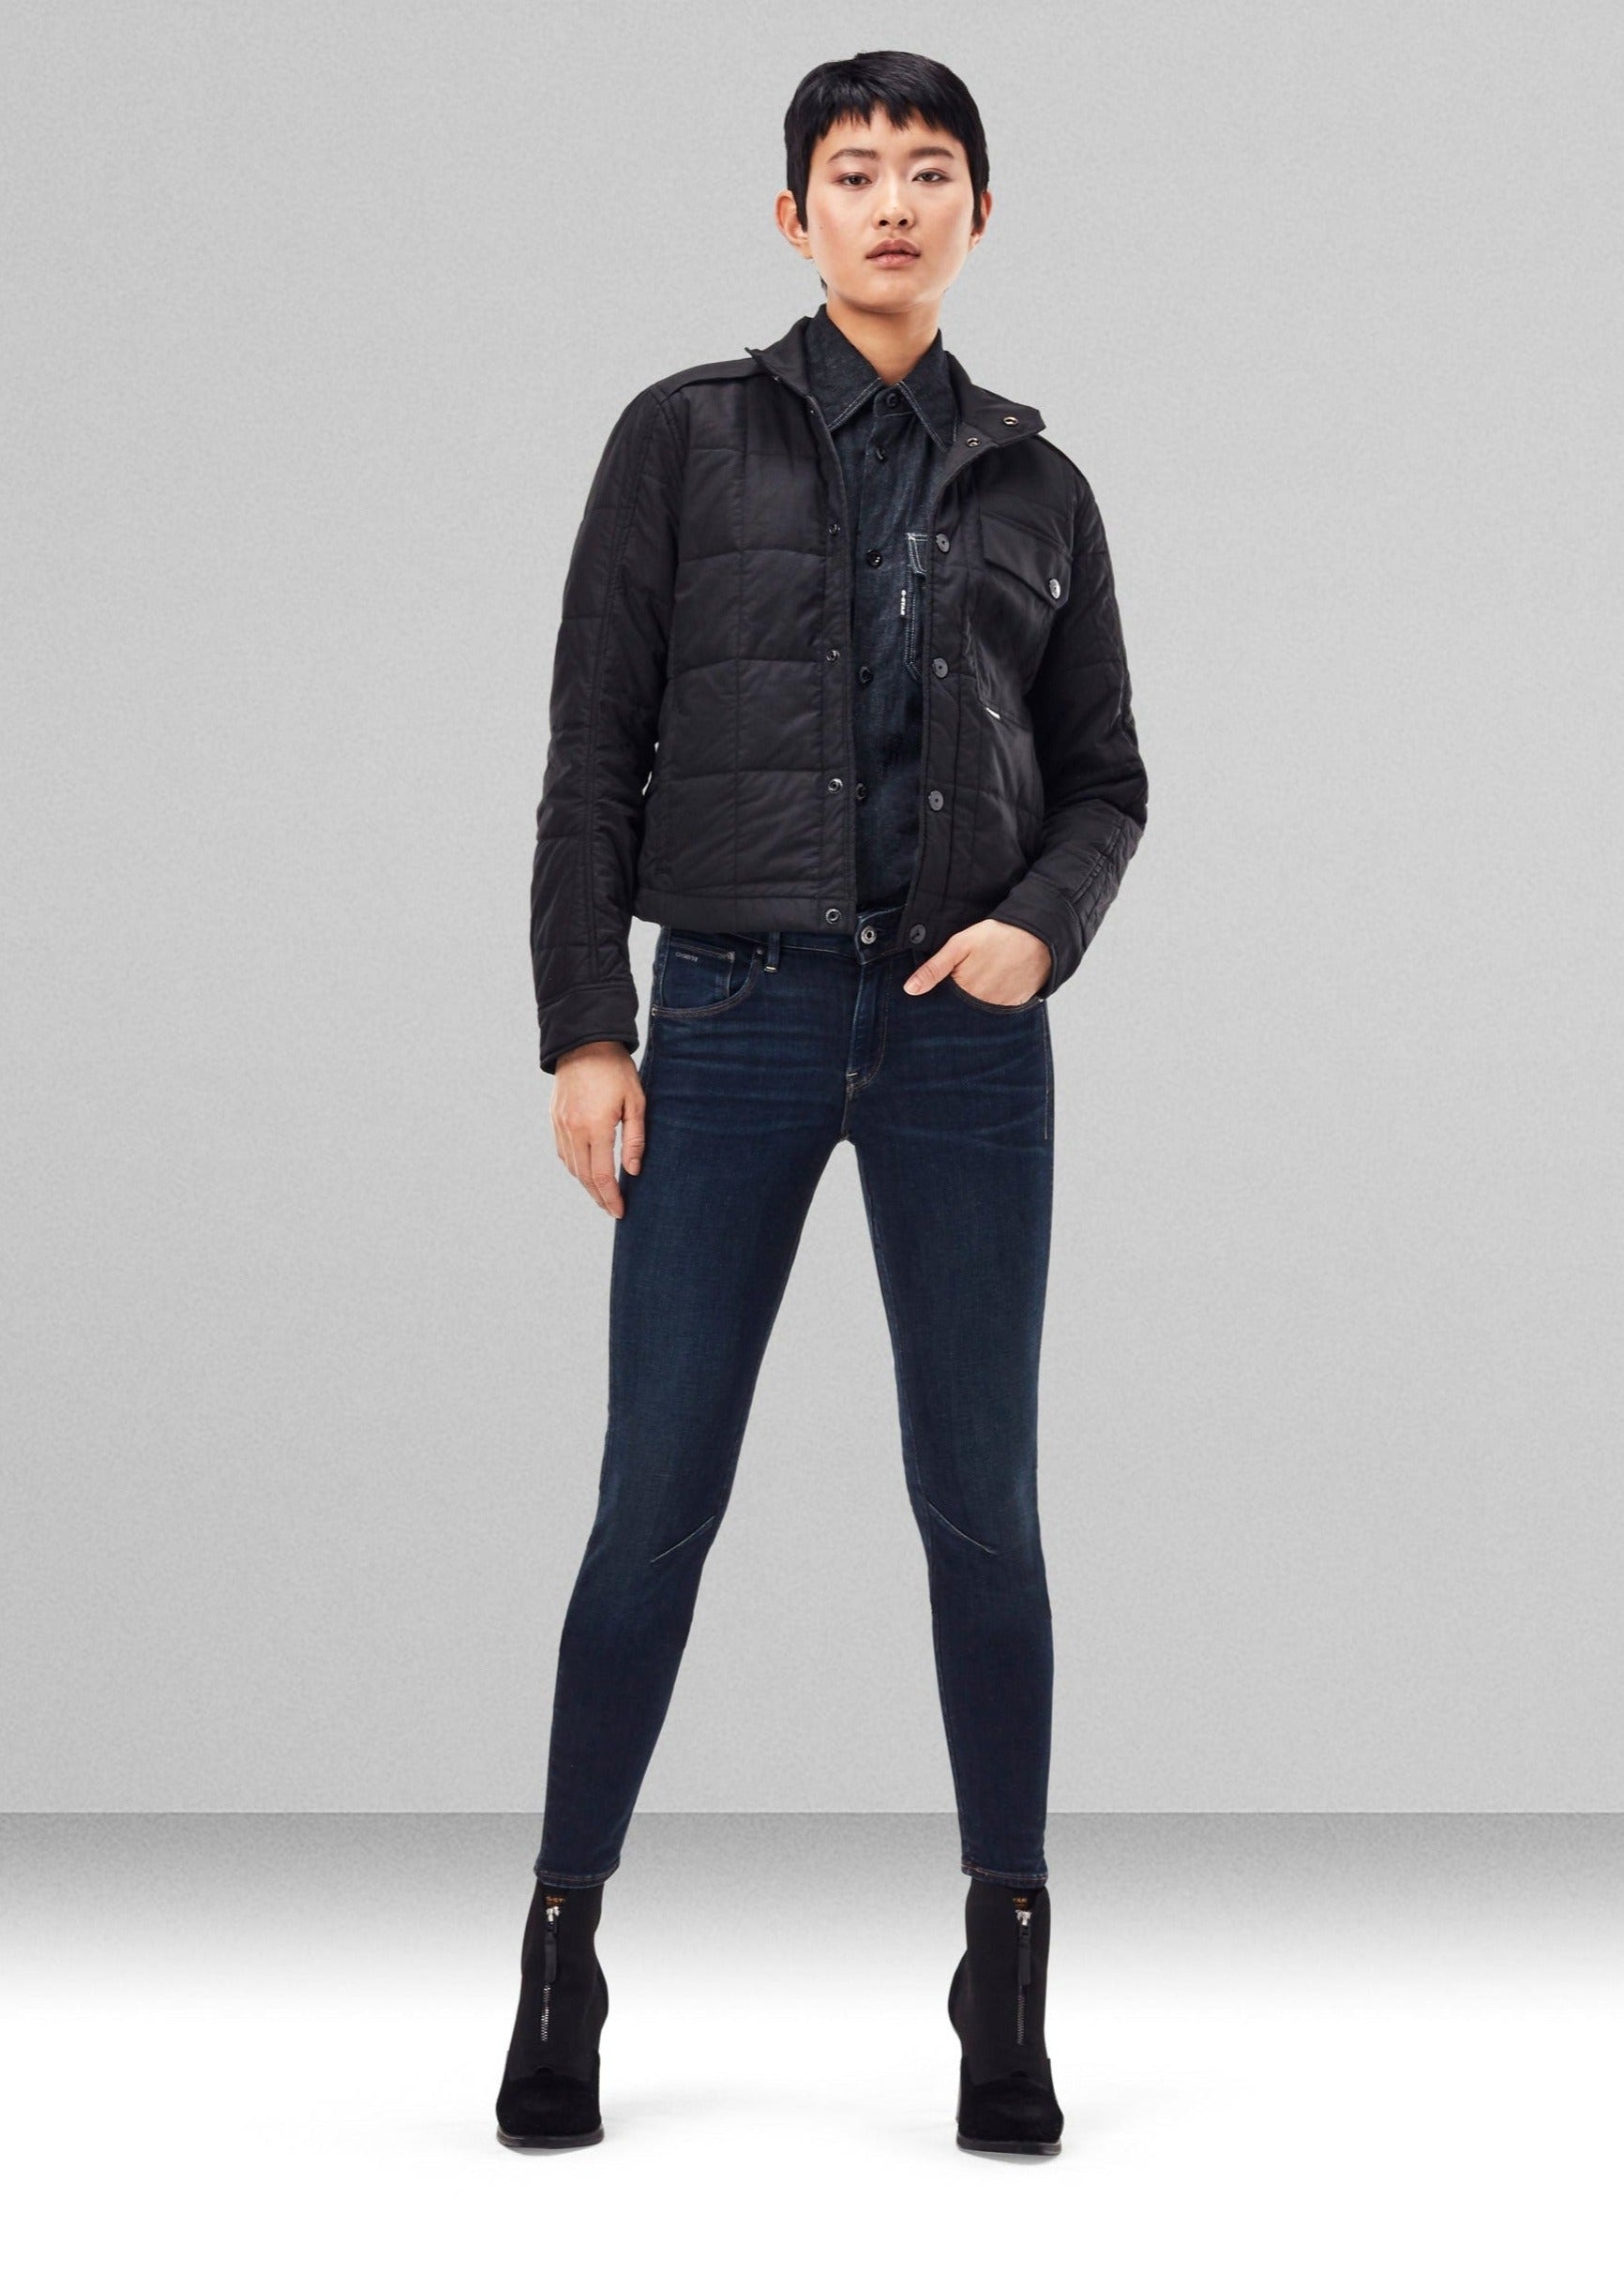 G-Star Quilted Overshirt Jacket-Fi&Co Boutique